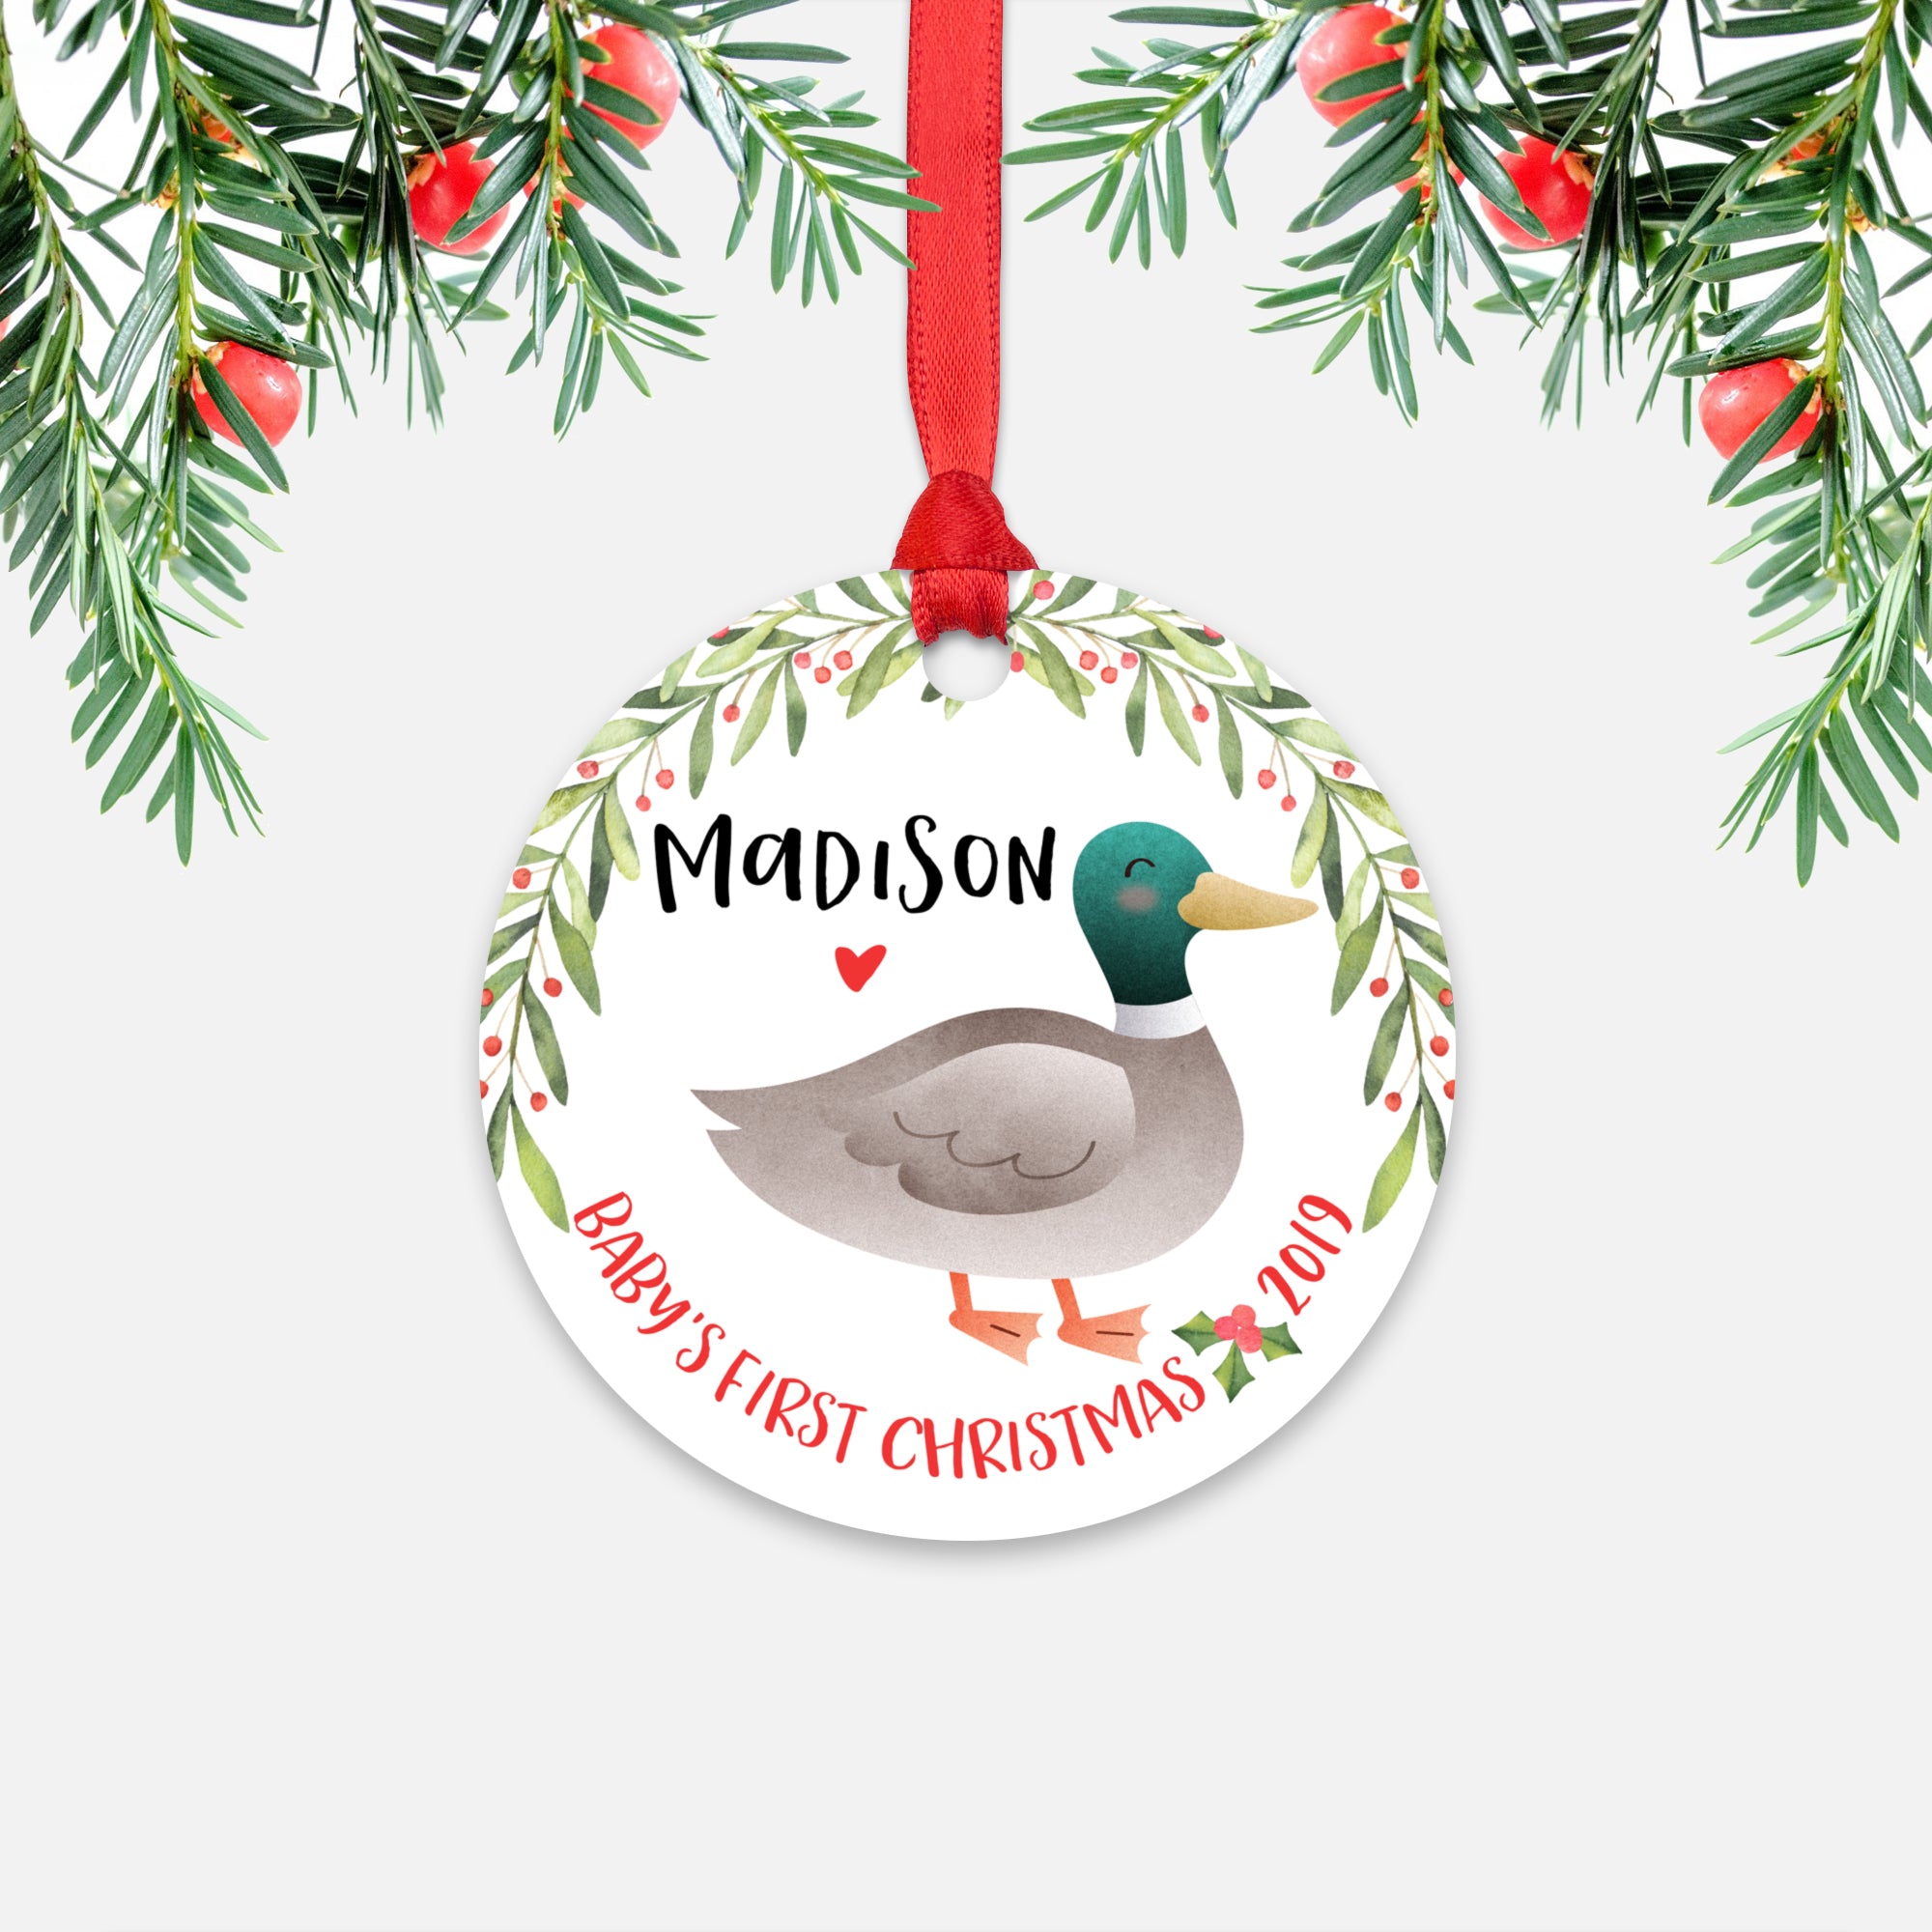 Mallard Duck Personalized Baby’s First Christmas Ornament for Baby Boy or Baby Girl - Cute Farm Animal Baby 1st Holidays Decoration - Custom Christmas Gift Idea for New Parents - Round Aluminum - by Happy Cat Prints